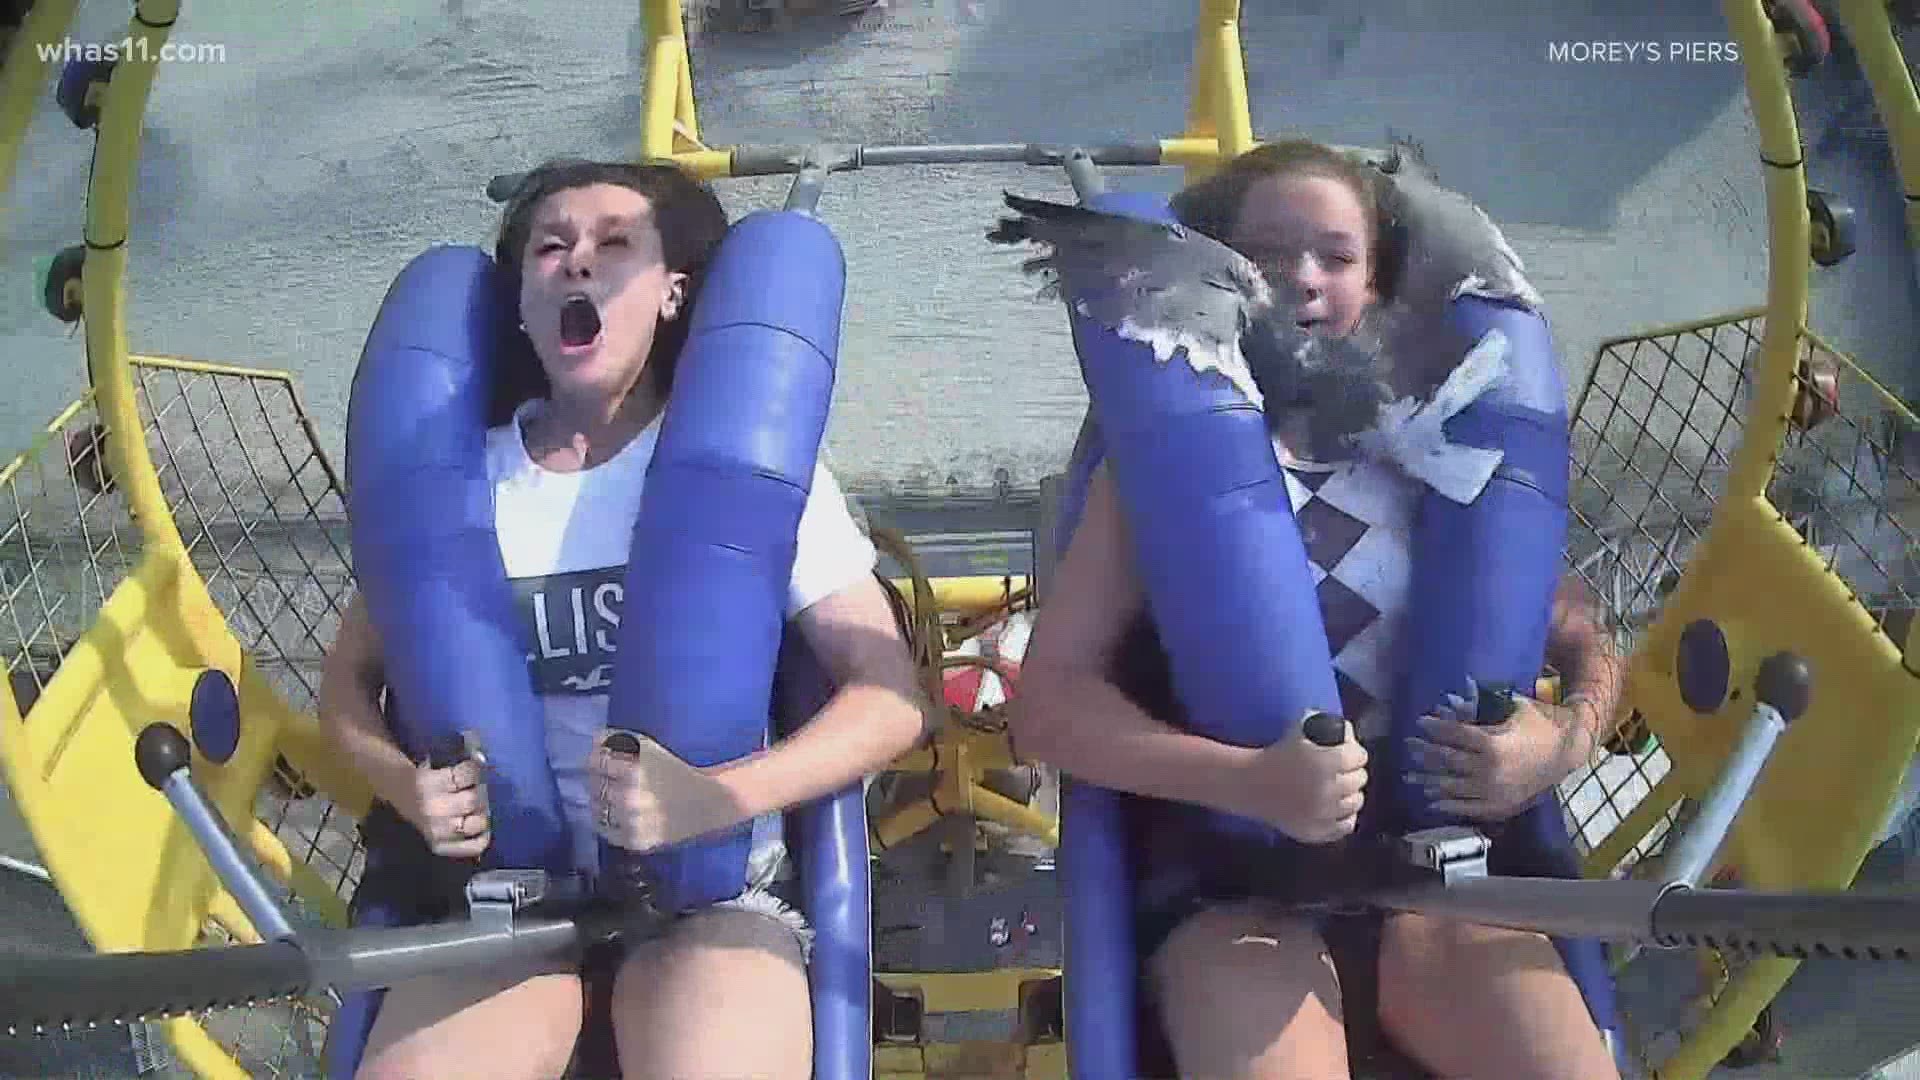 The video captured by a camera at the park shows a seagull hitting the teen in the face shortly after the ride launches.